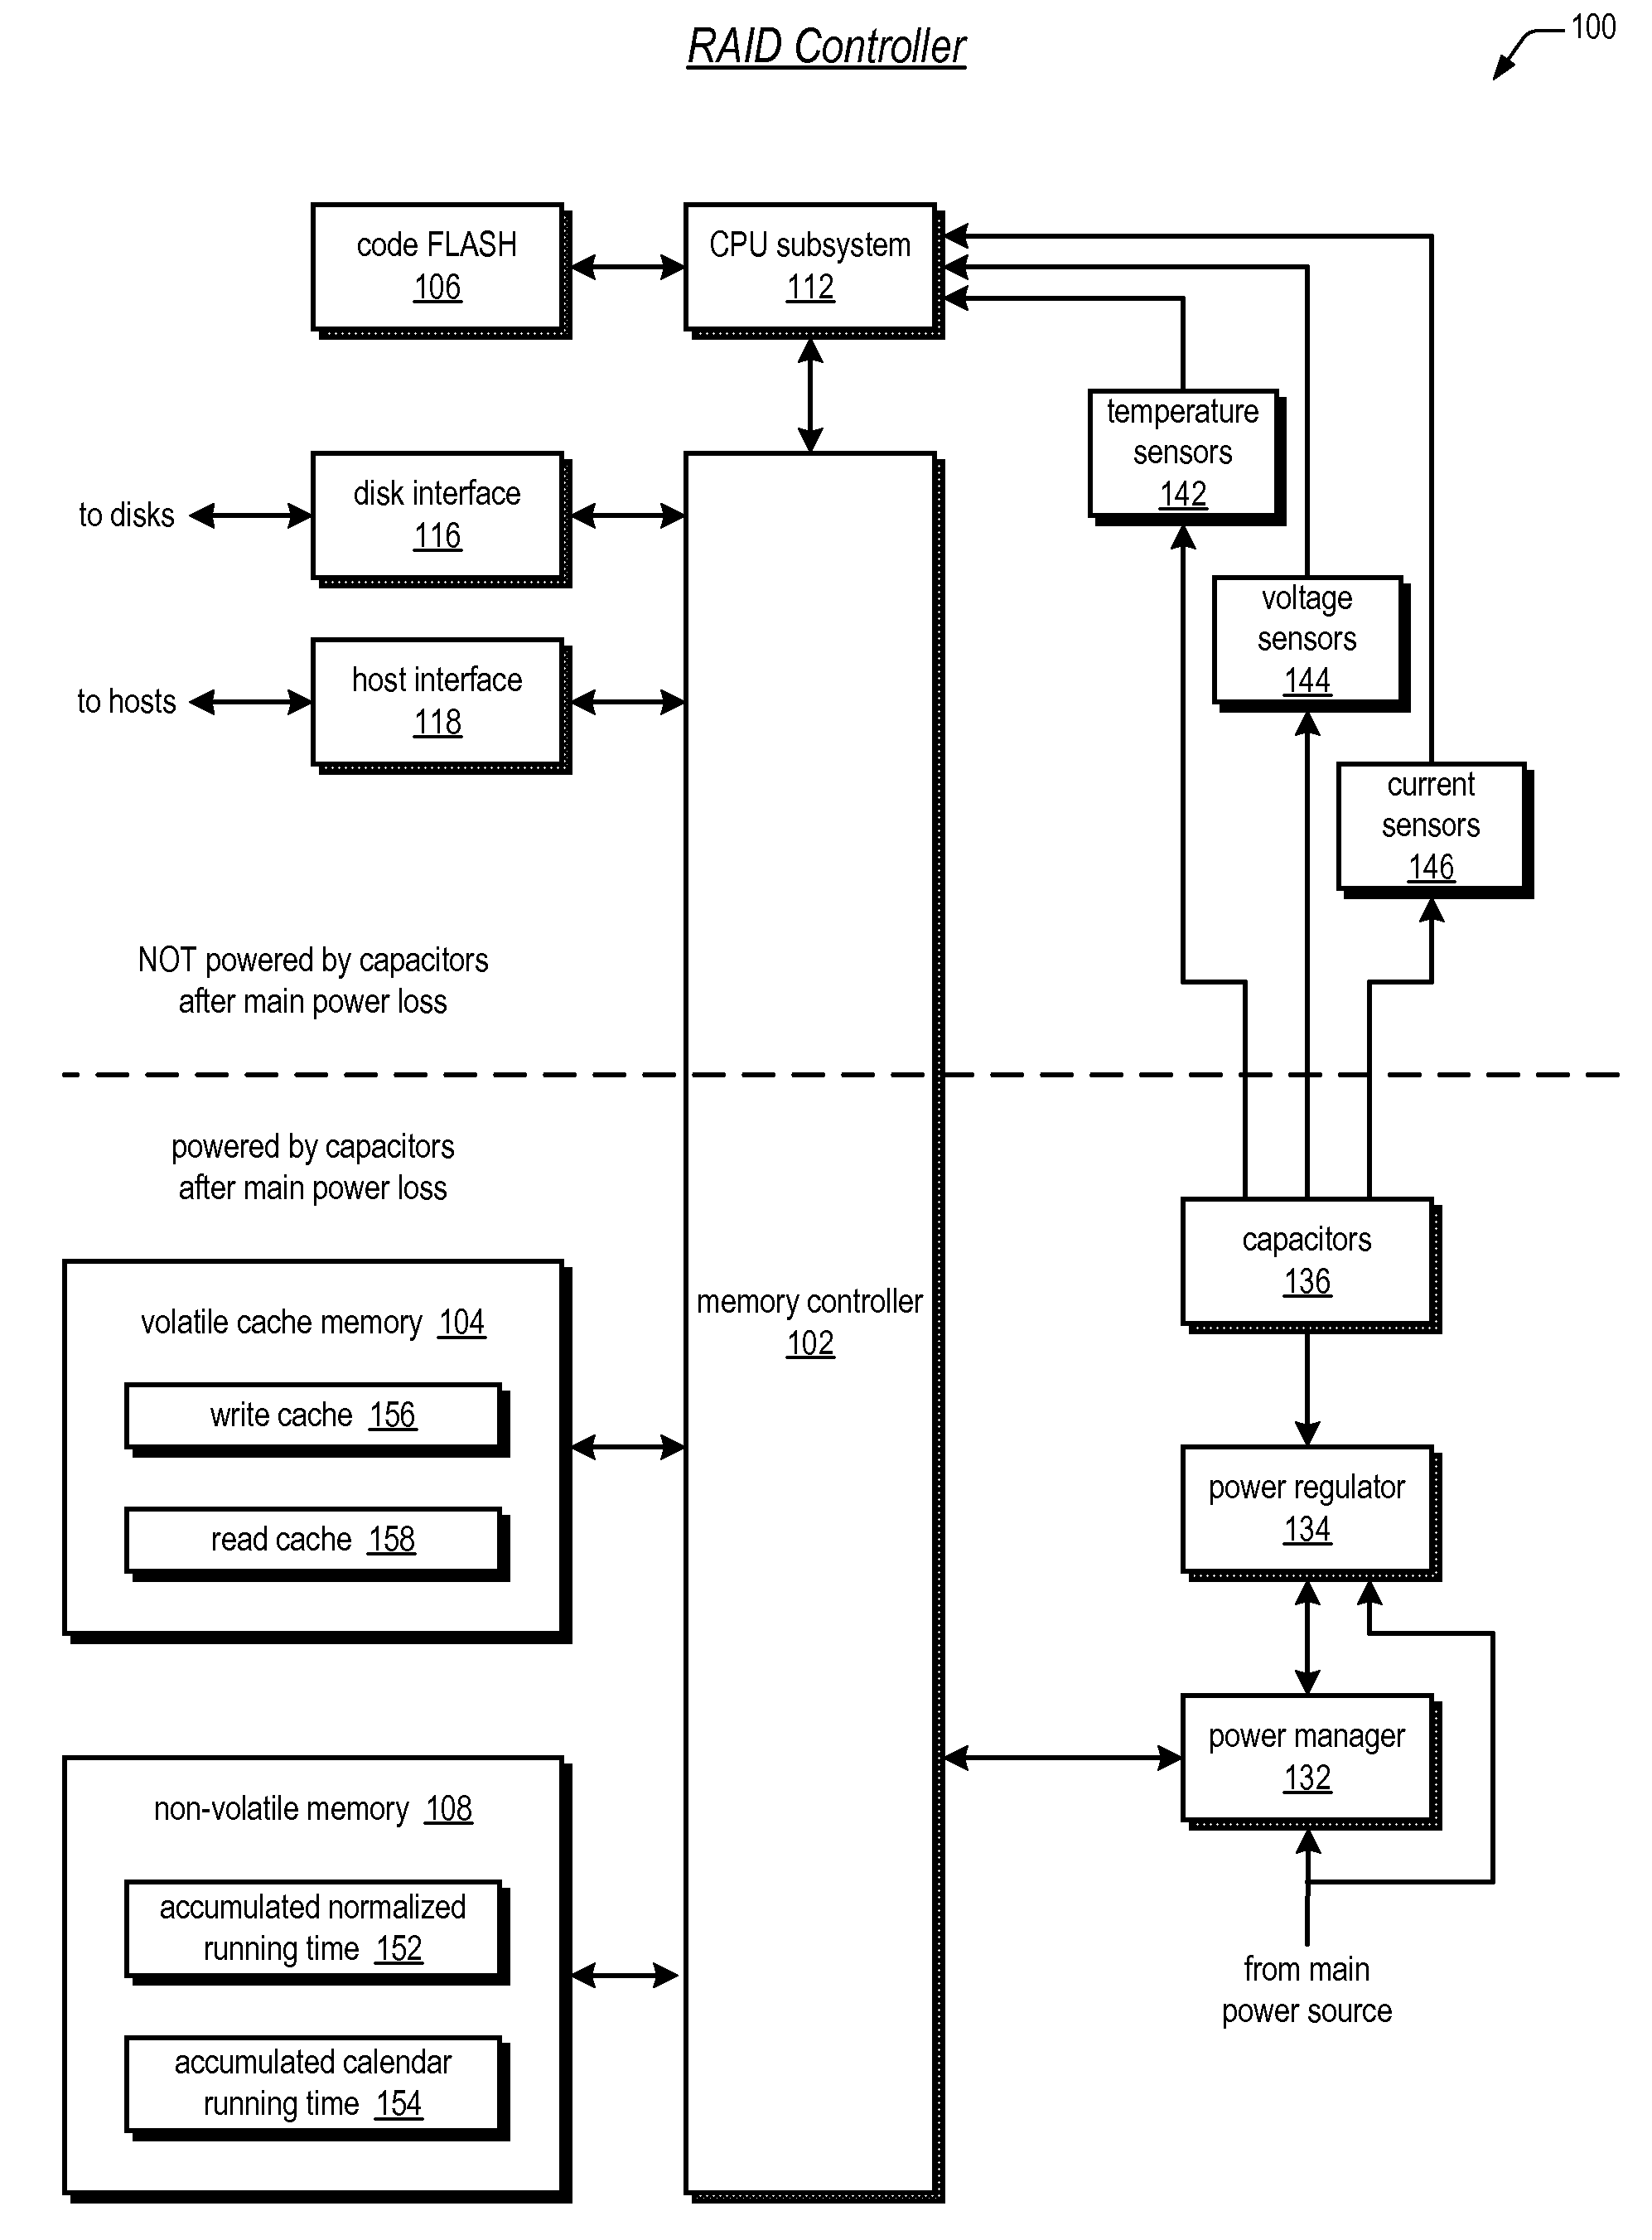 Dynamic write cache size adjustment in raid controller with capacitor backup energy source